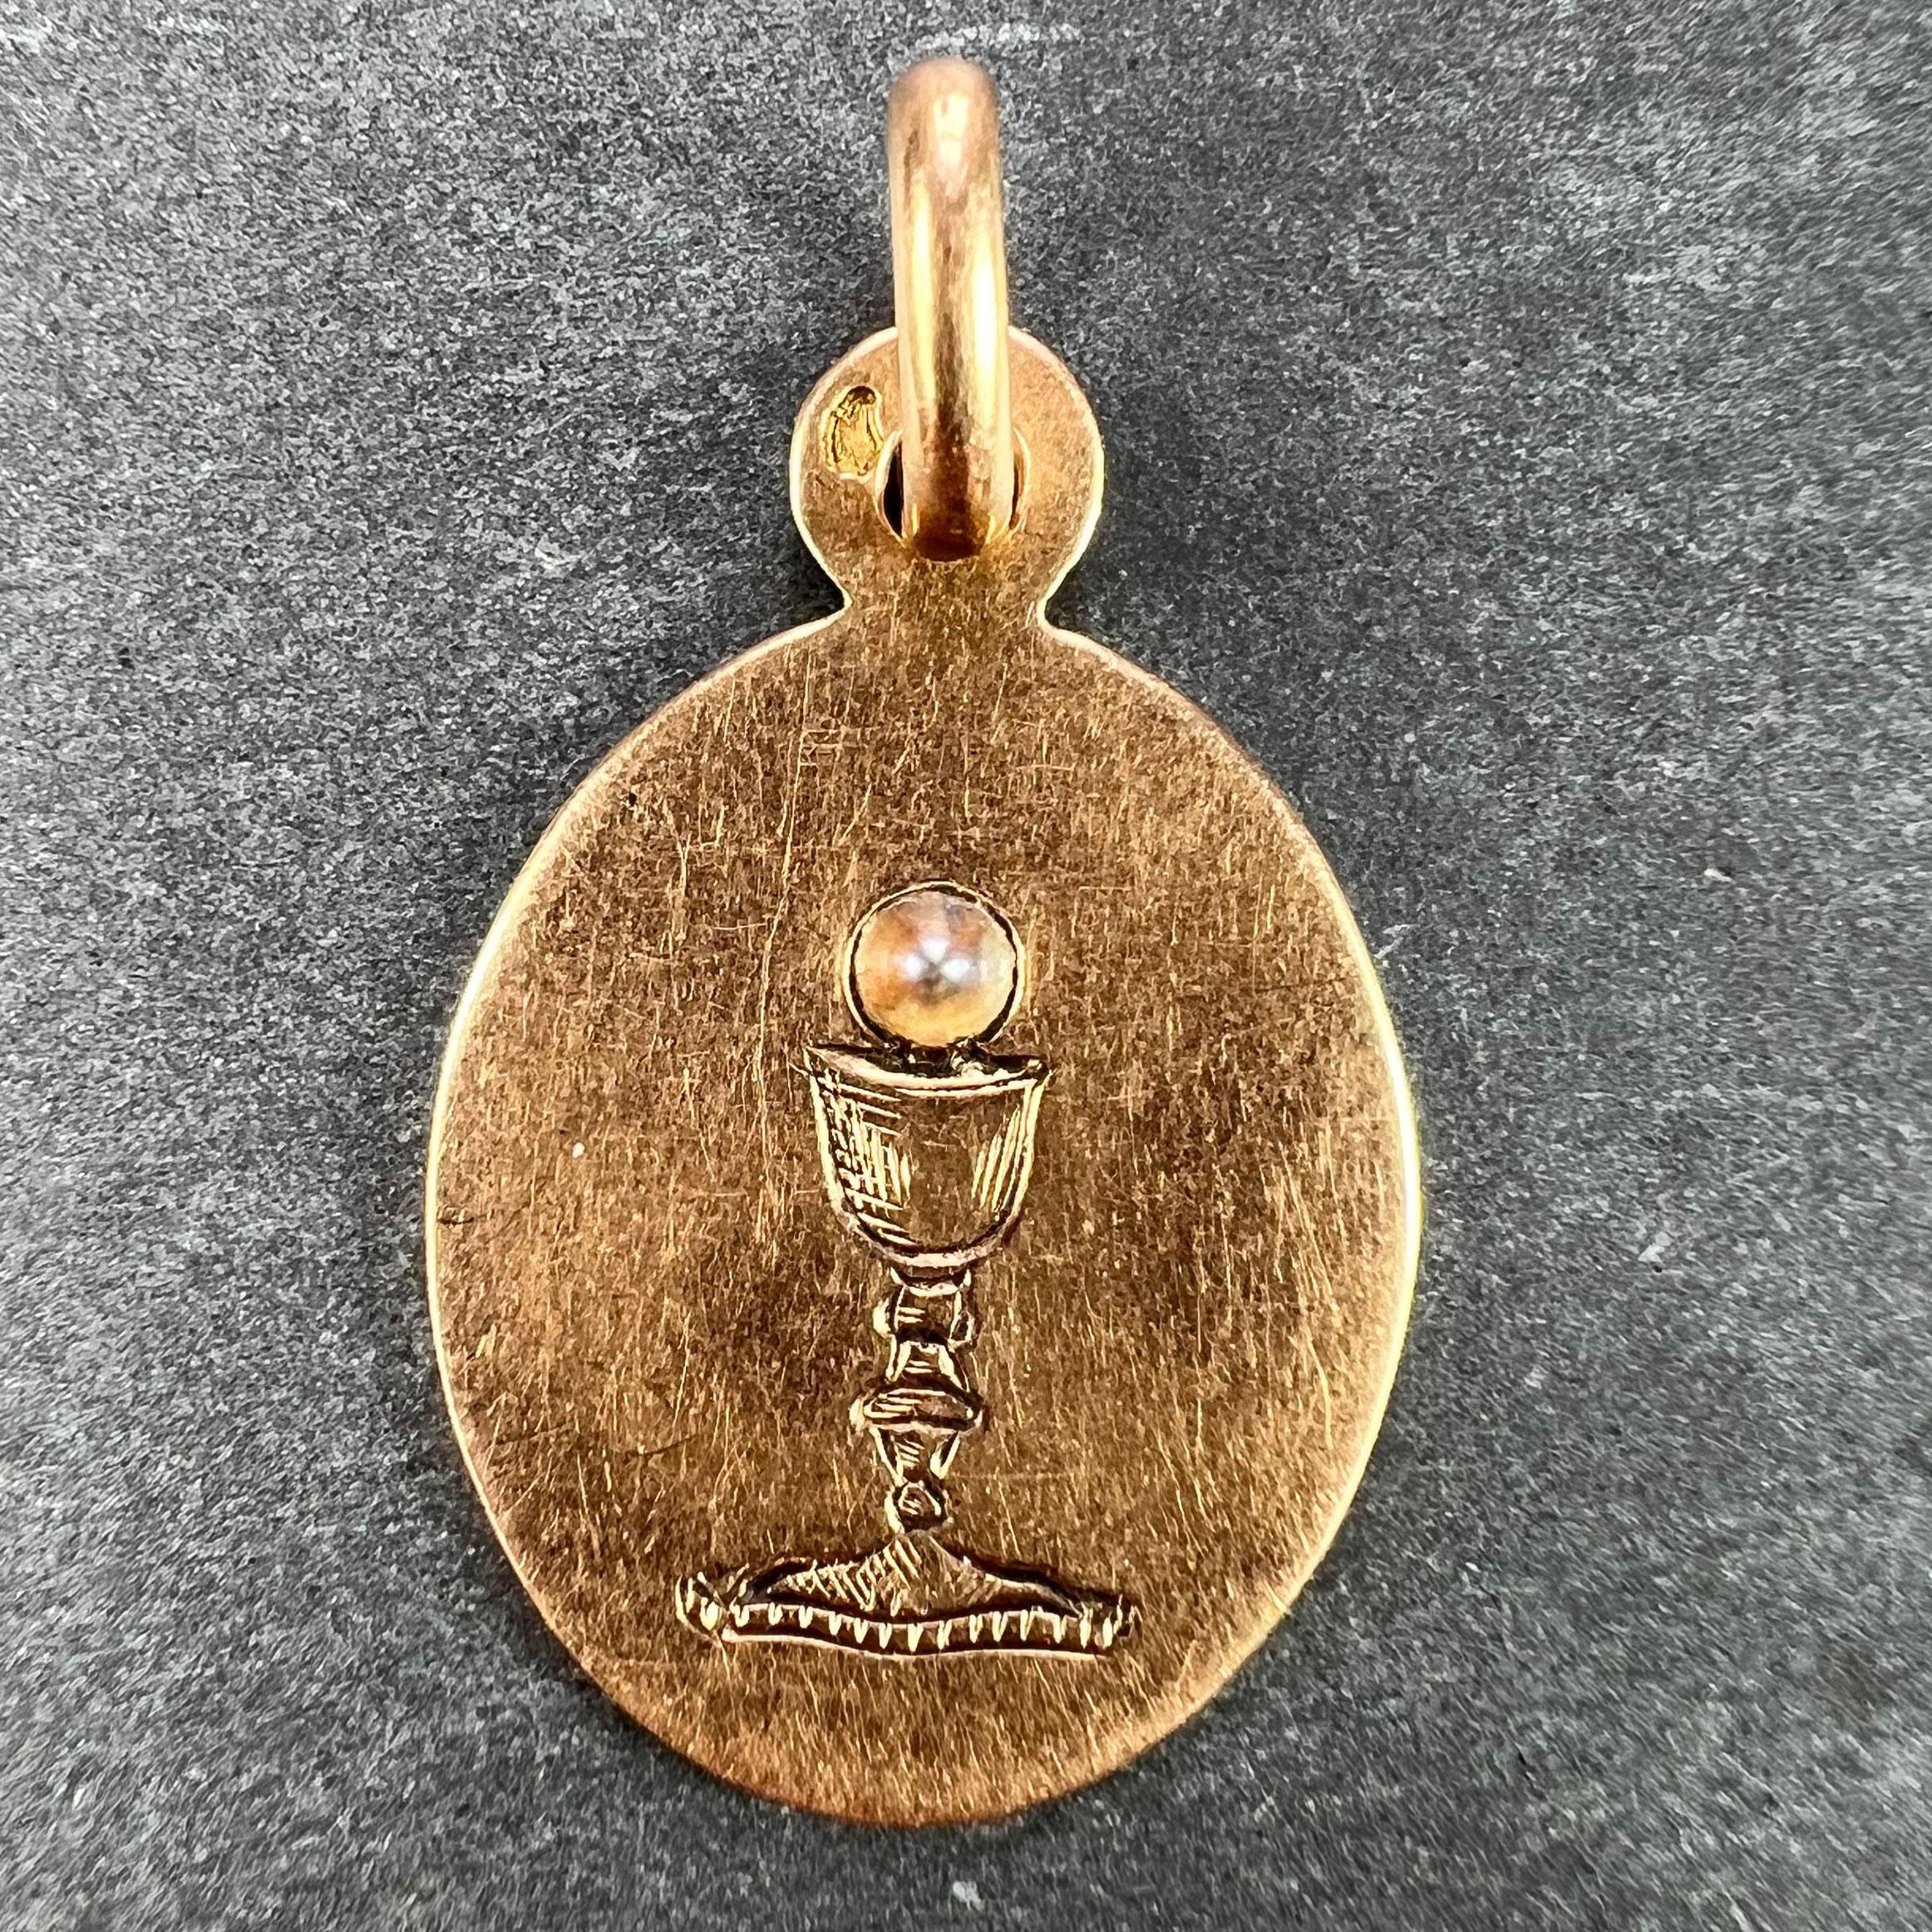 A French 18 karat (18K) rose gold charm pendant designed as an oval medal engraved with the Holy Chalice topped with a pearl. Engraved to the reverse with the monogram SL and the date 18 Mai 1905. Stamped with the eagle mark for 18 karat gold and